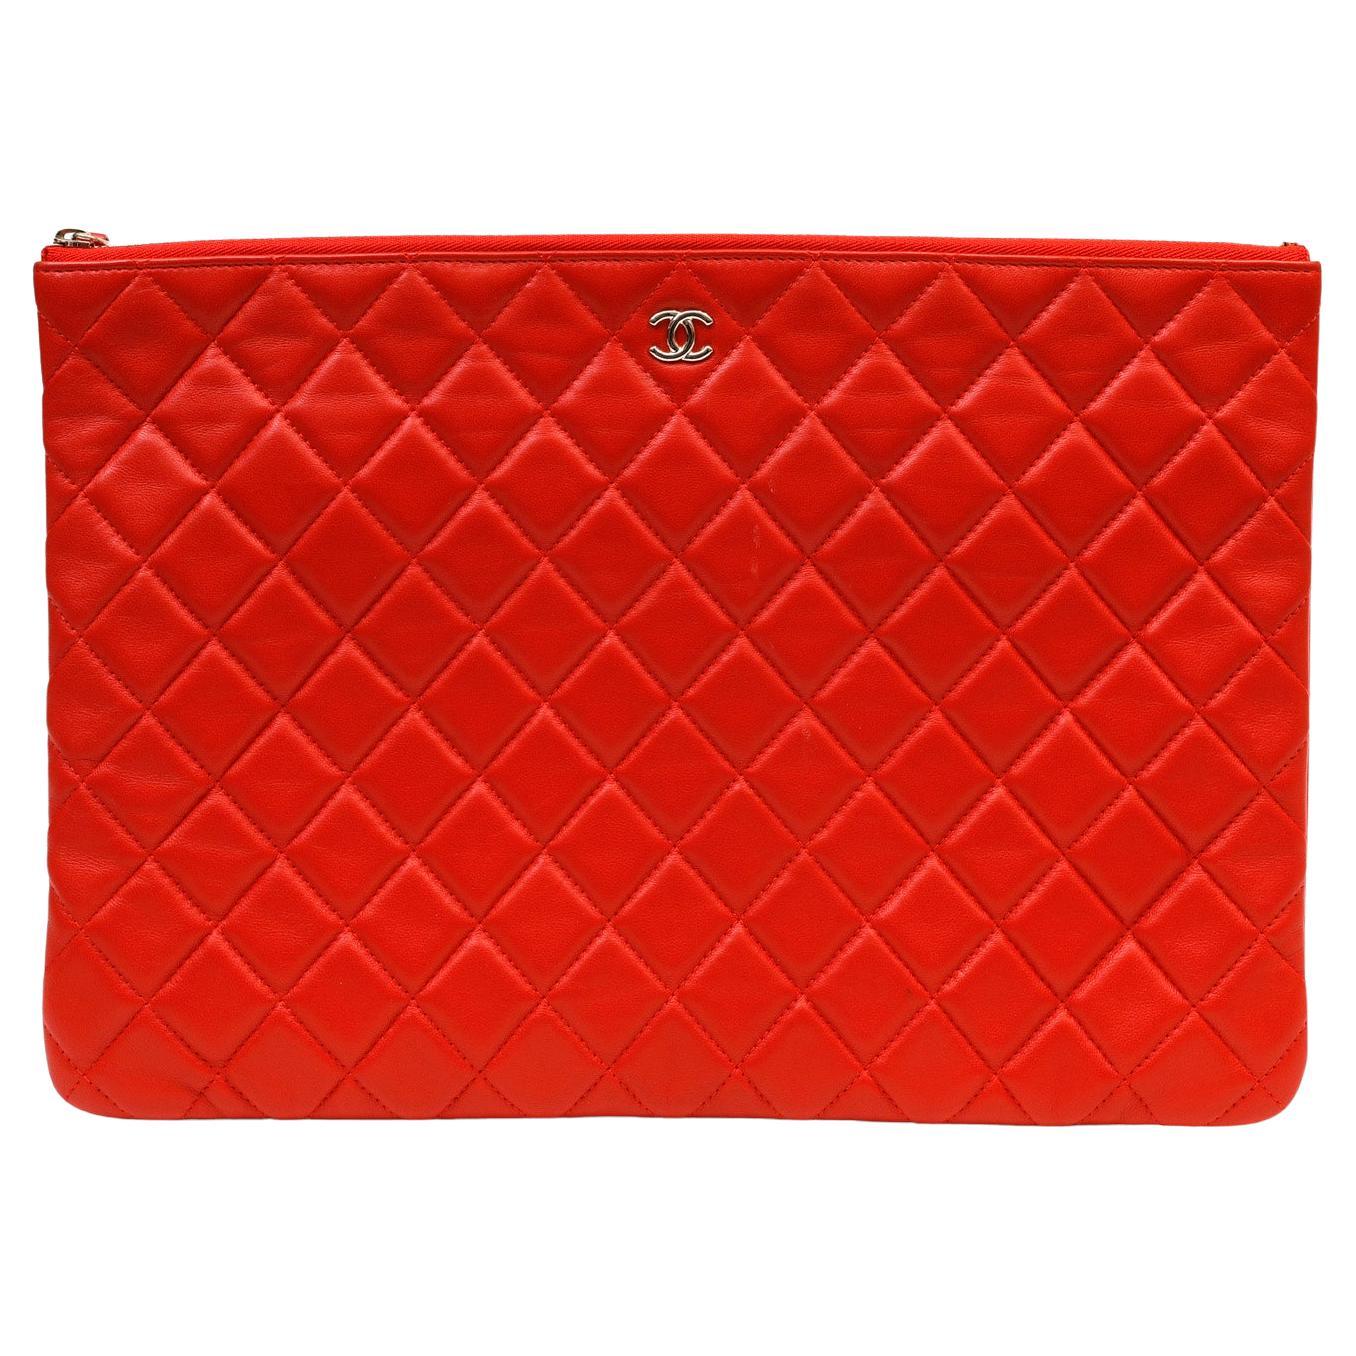  Chanel Red Lambskin Large Classic O Case